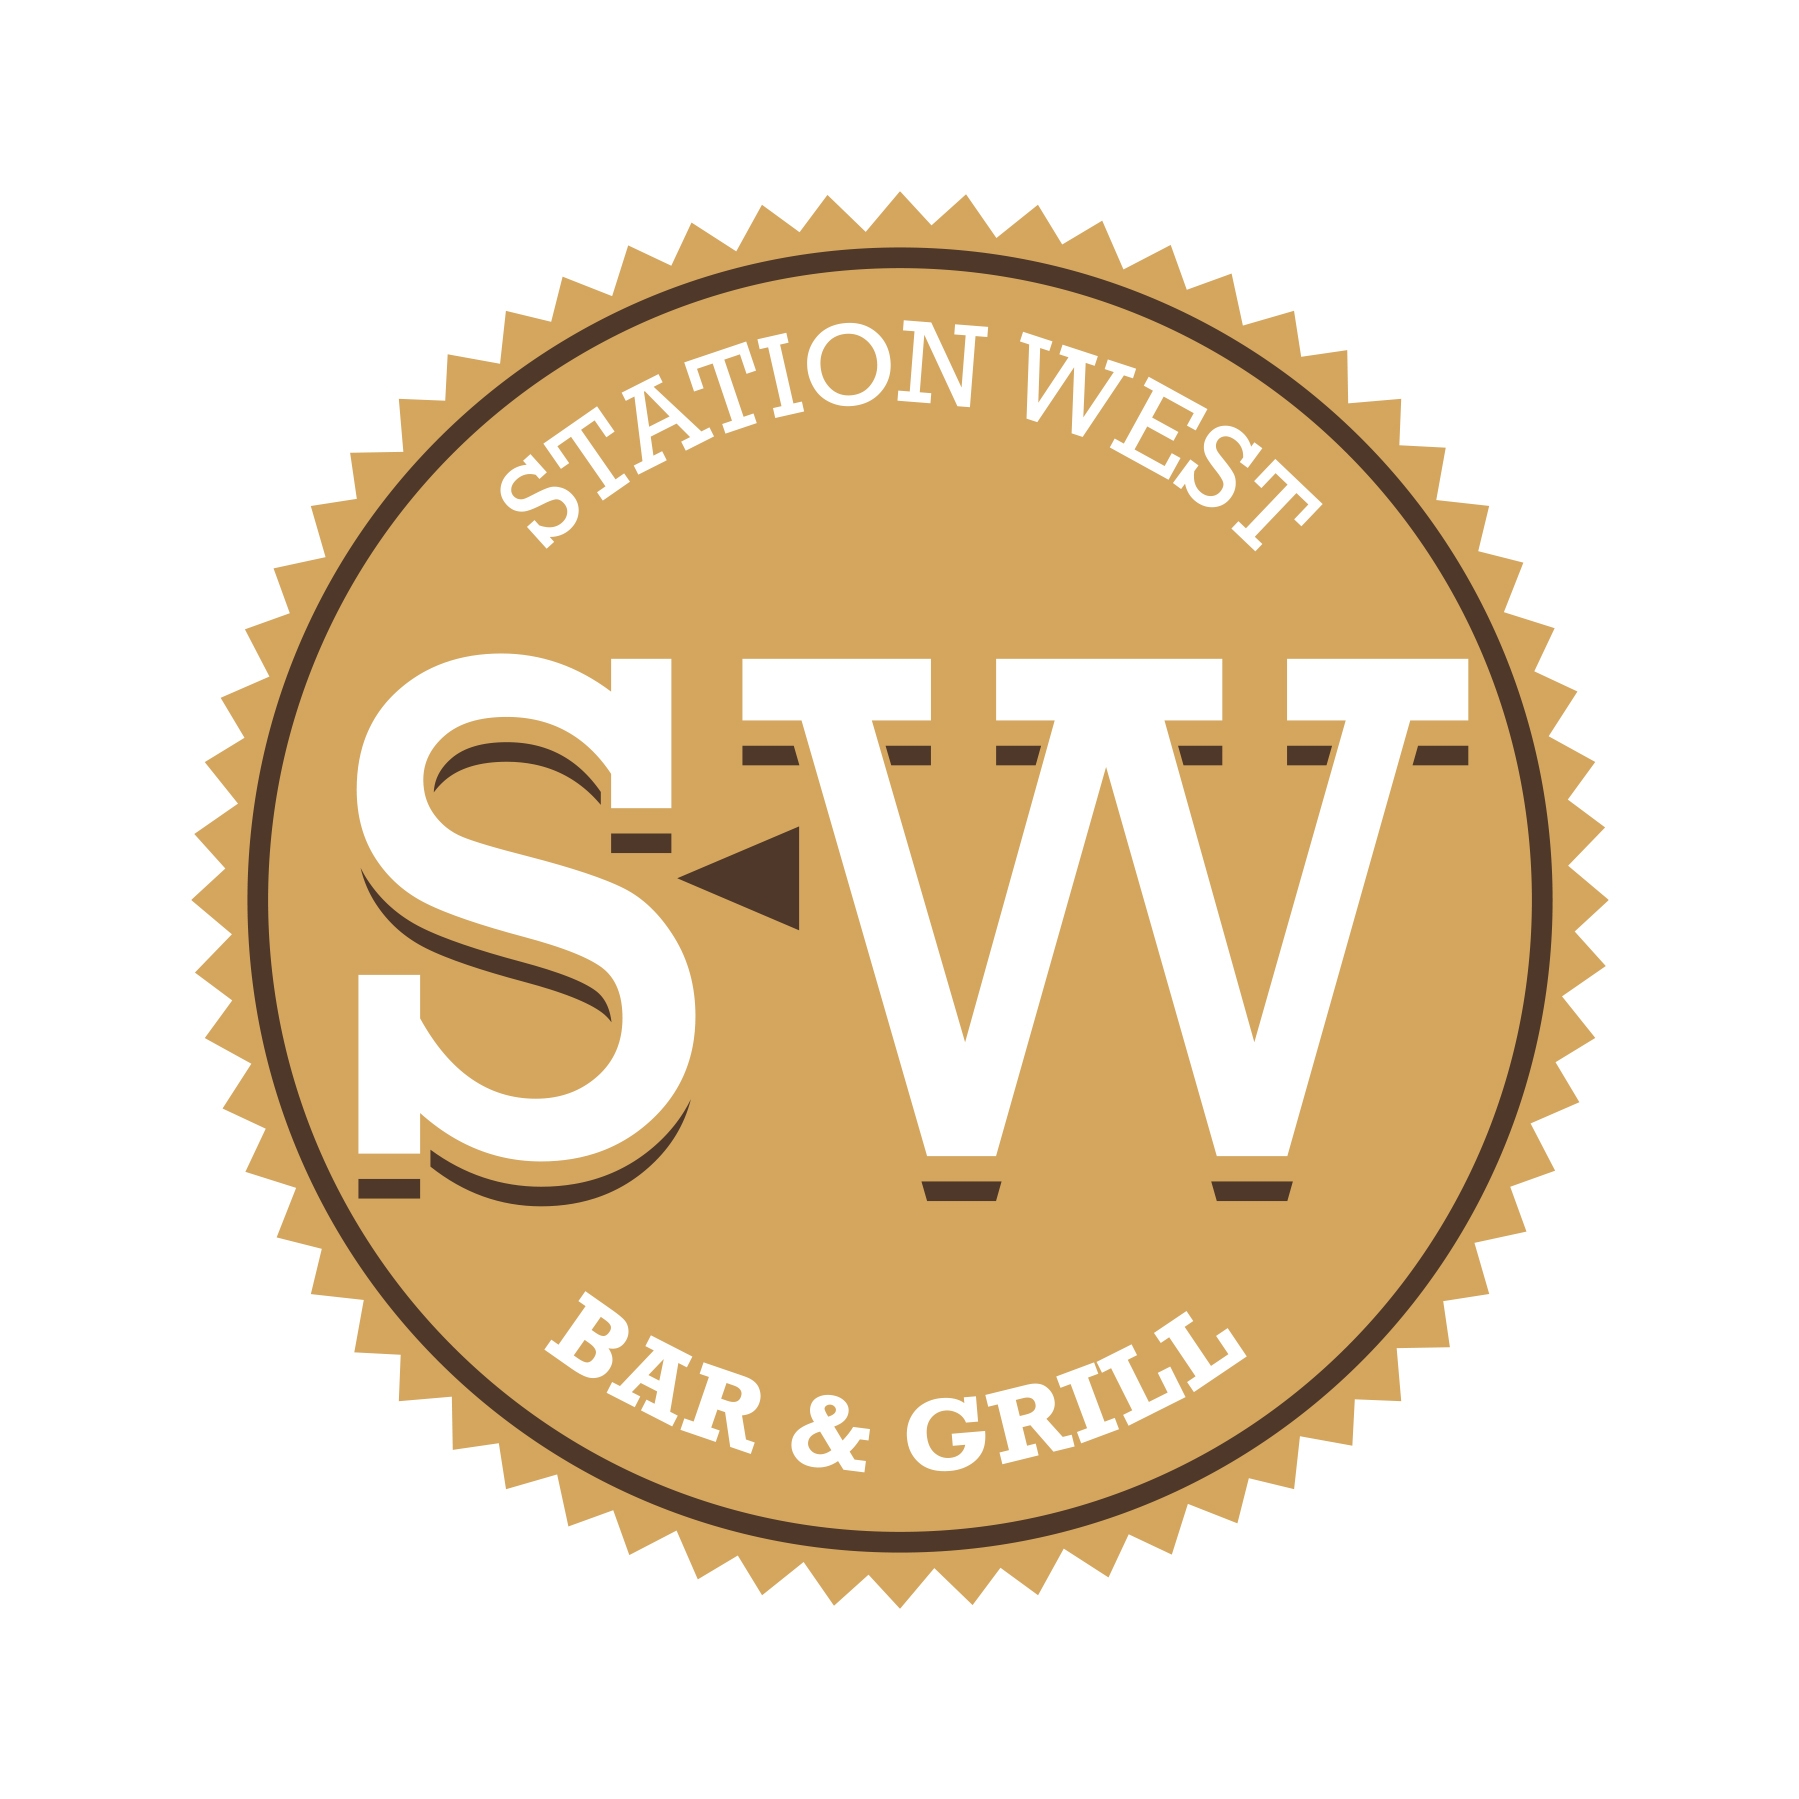 Station West Bar & Grill